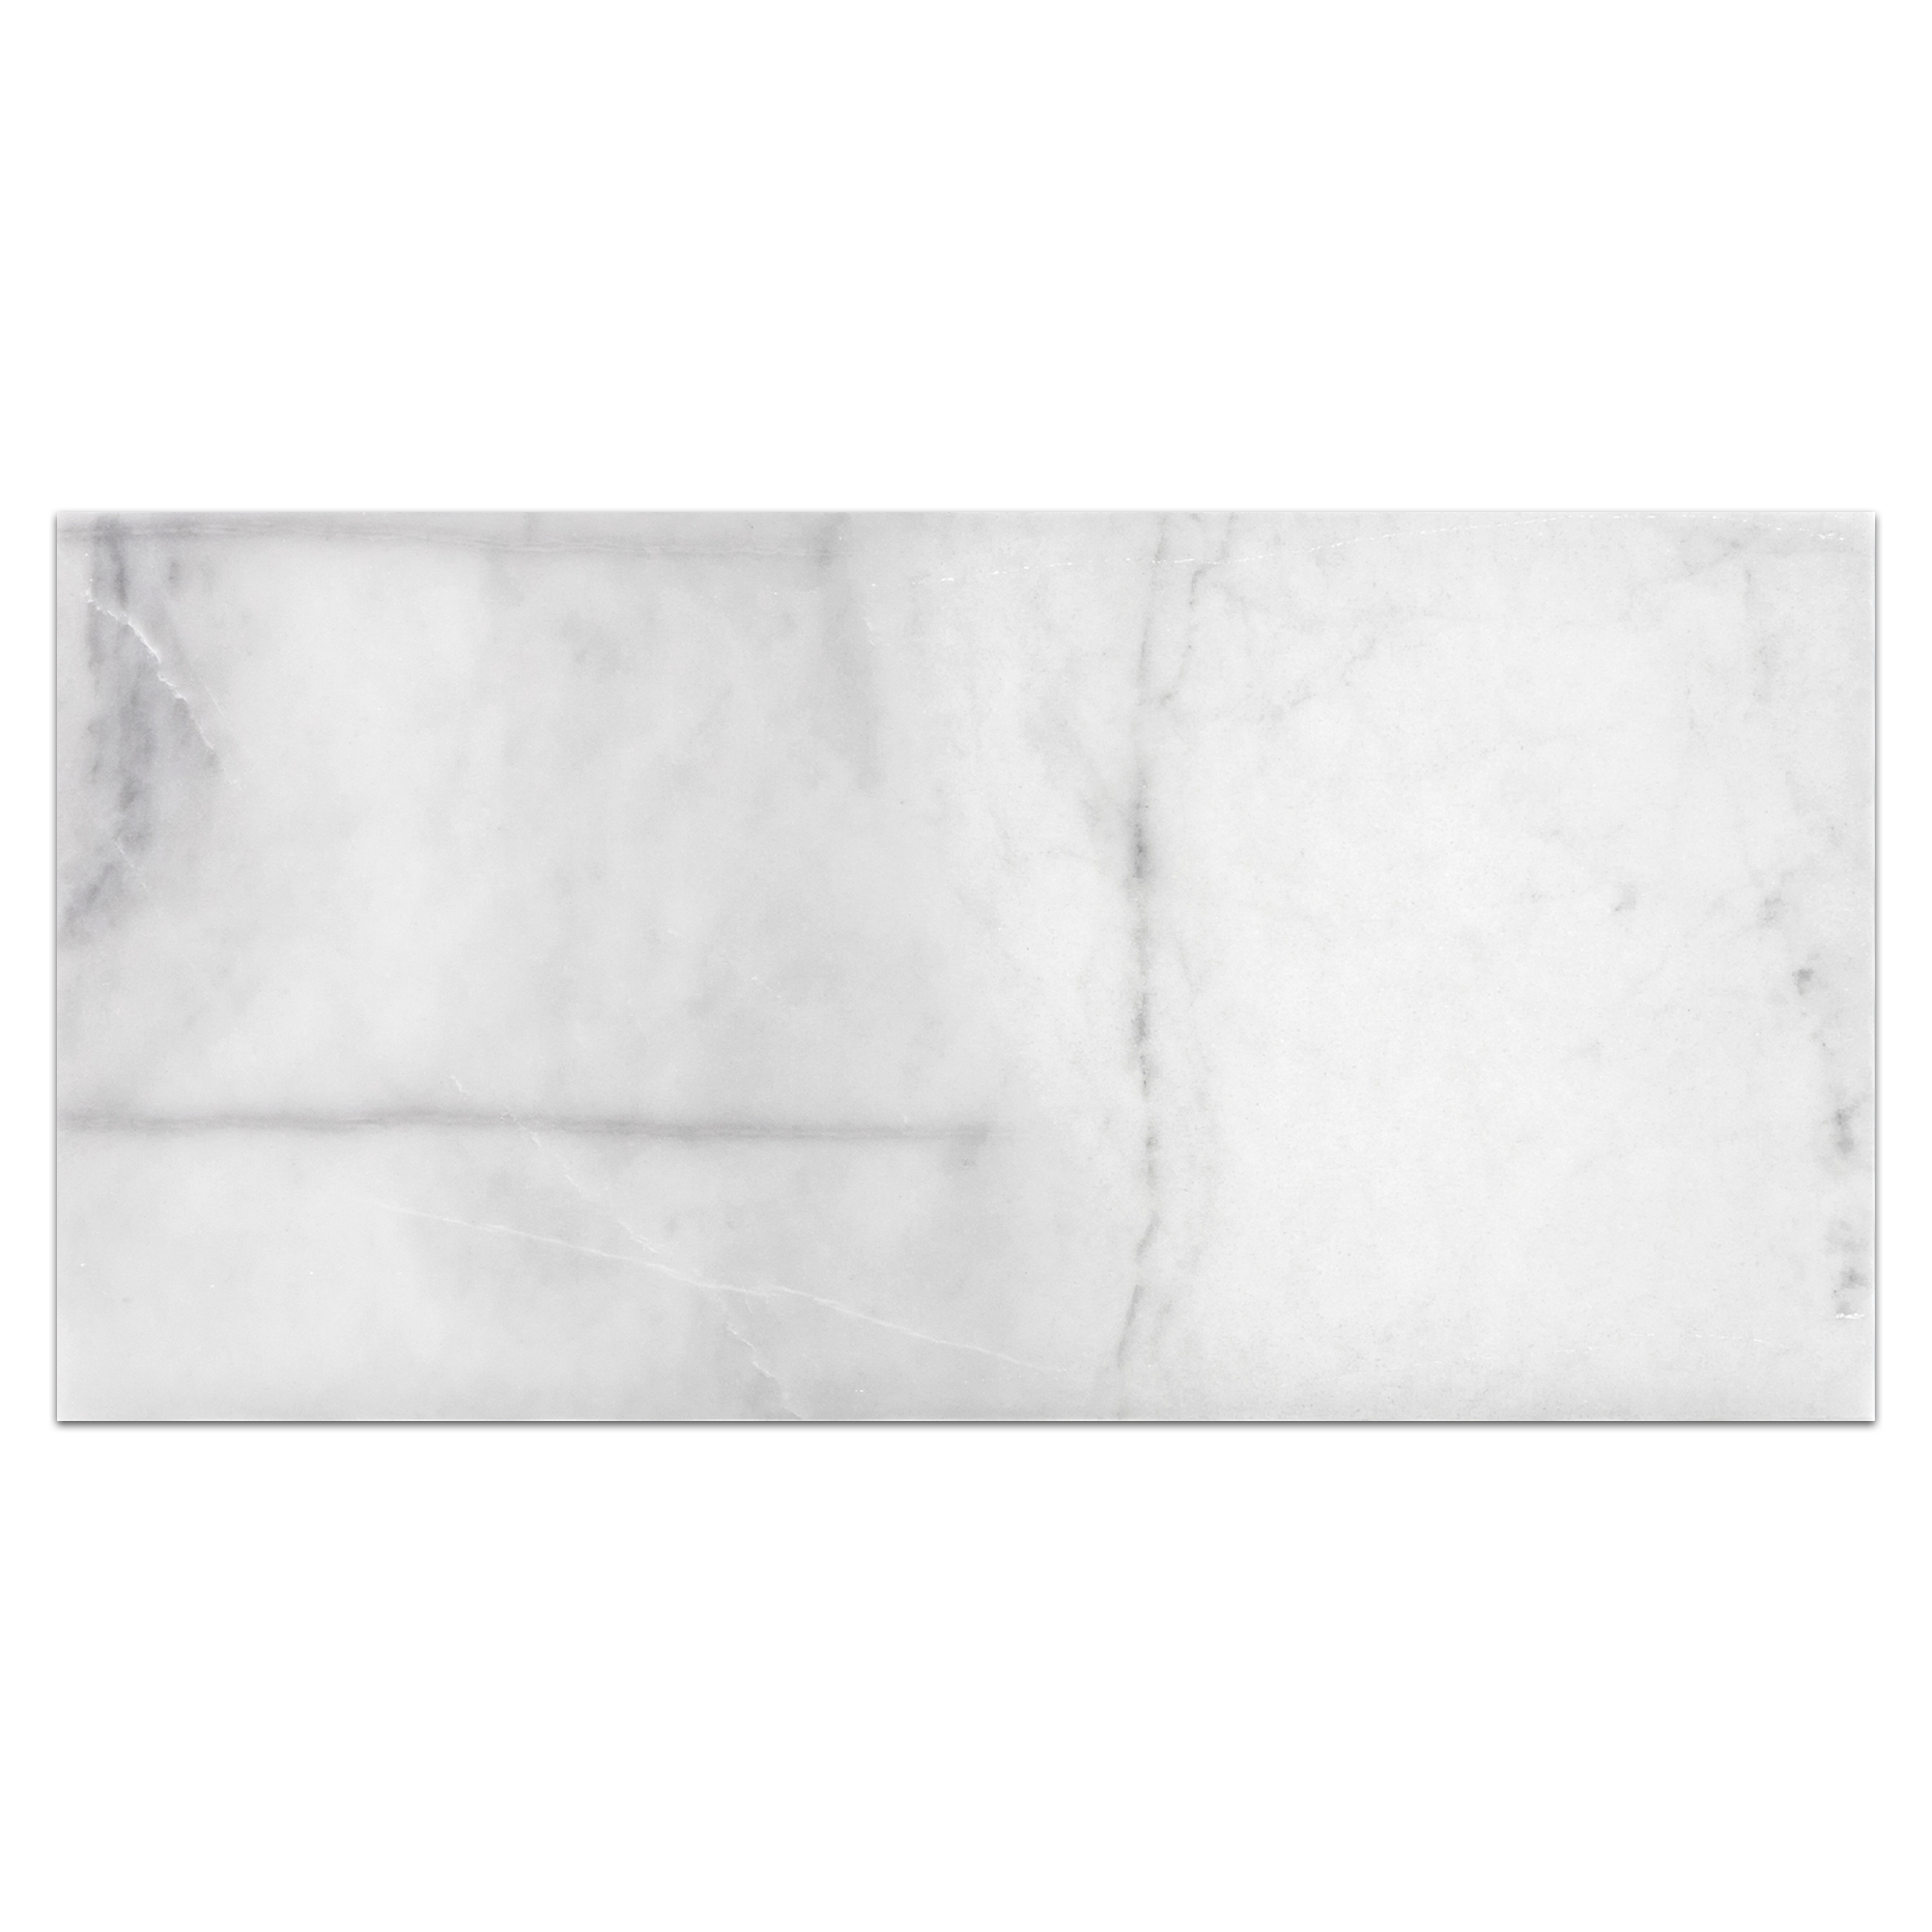 Elon Ice White Marble Rectangle Field Tile 12x24x0.375 Polished AM9624P Surface Group International